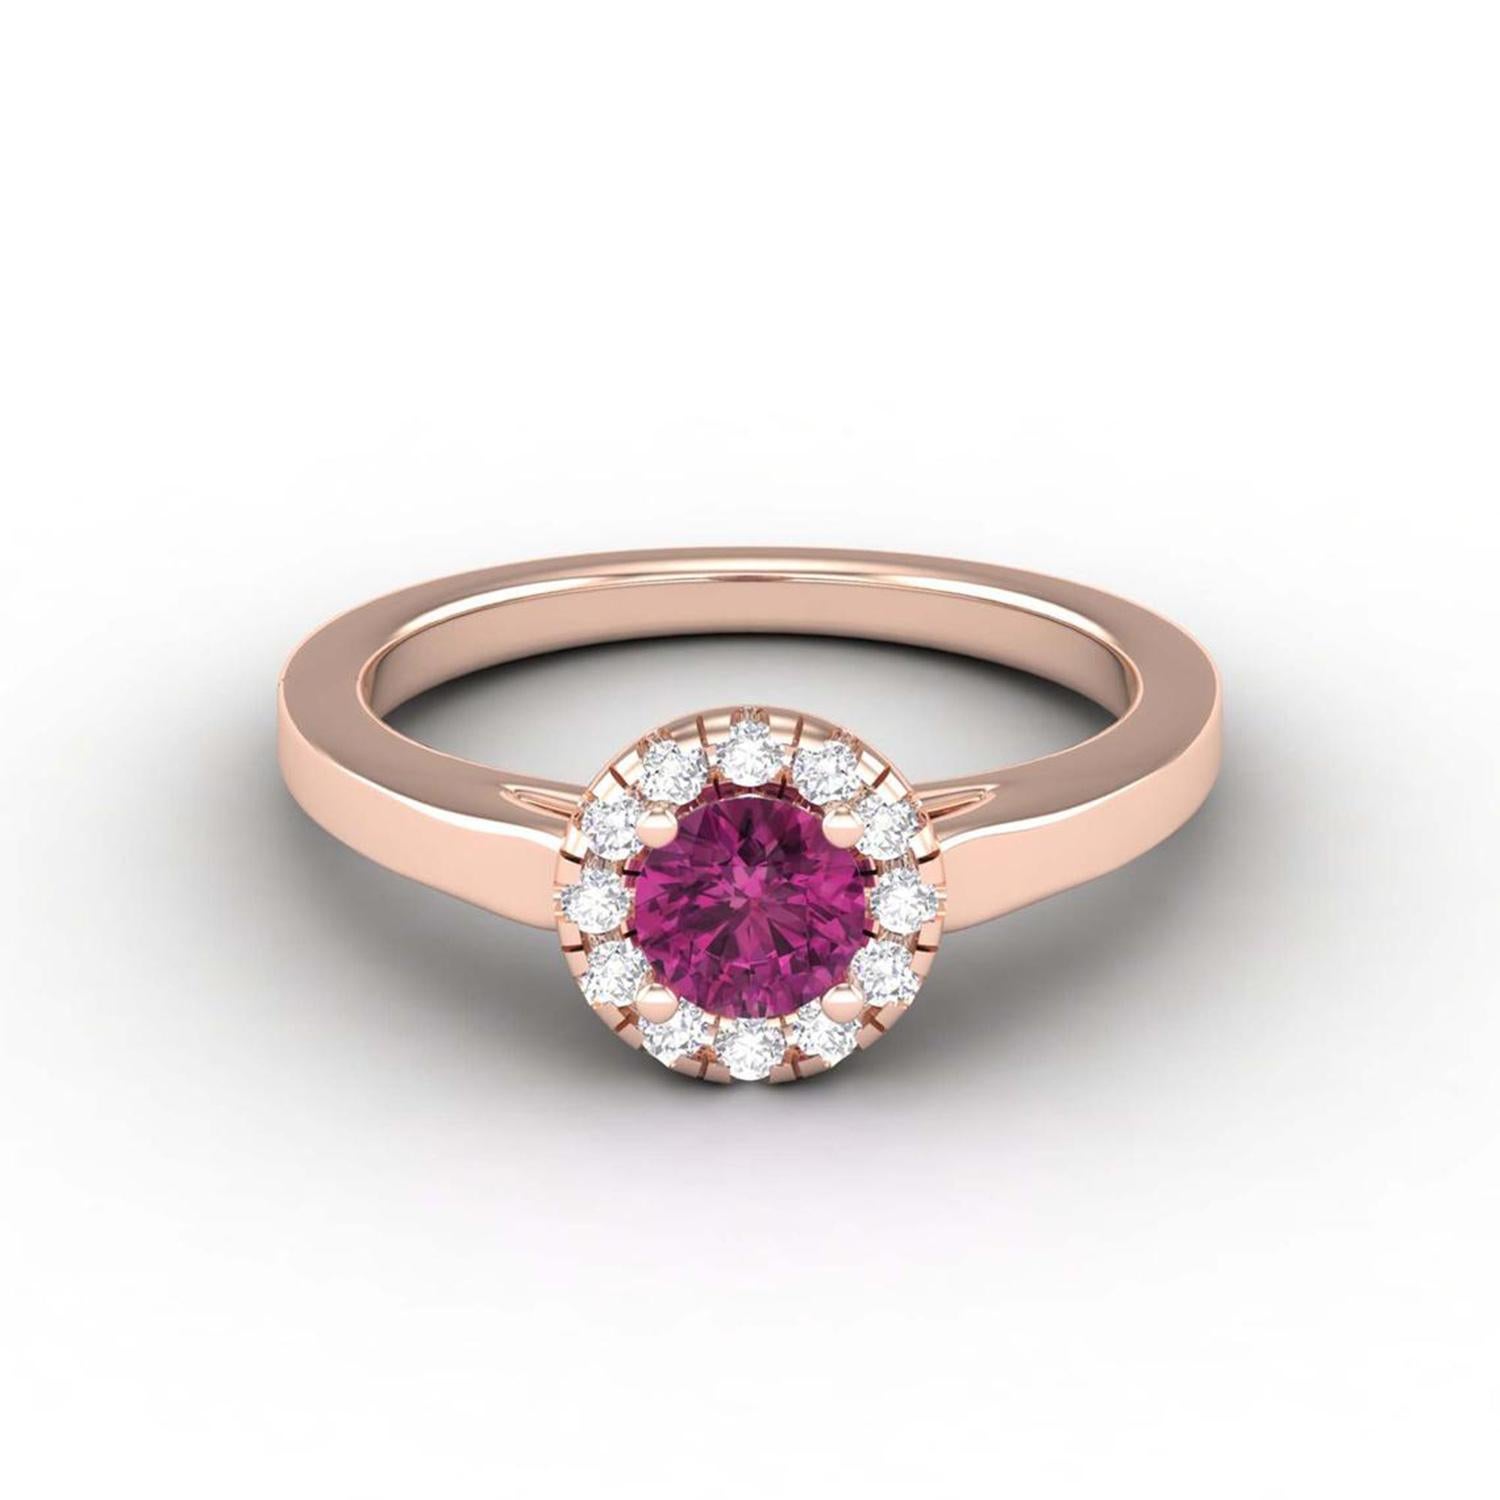 14 Karat Gold Pink Tourmaline Ring / Diamond Solitaire Ring / Ring for Her For Sale 1